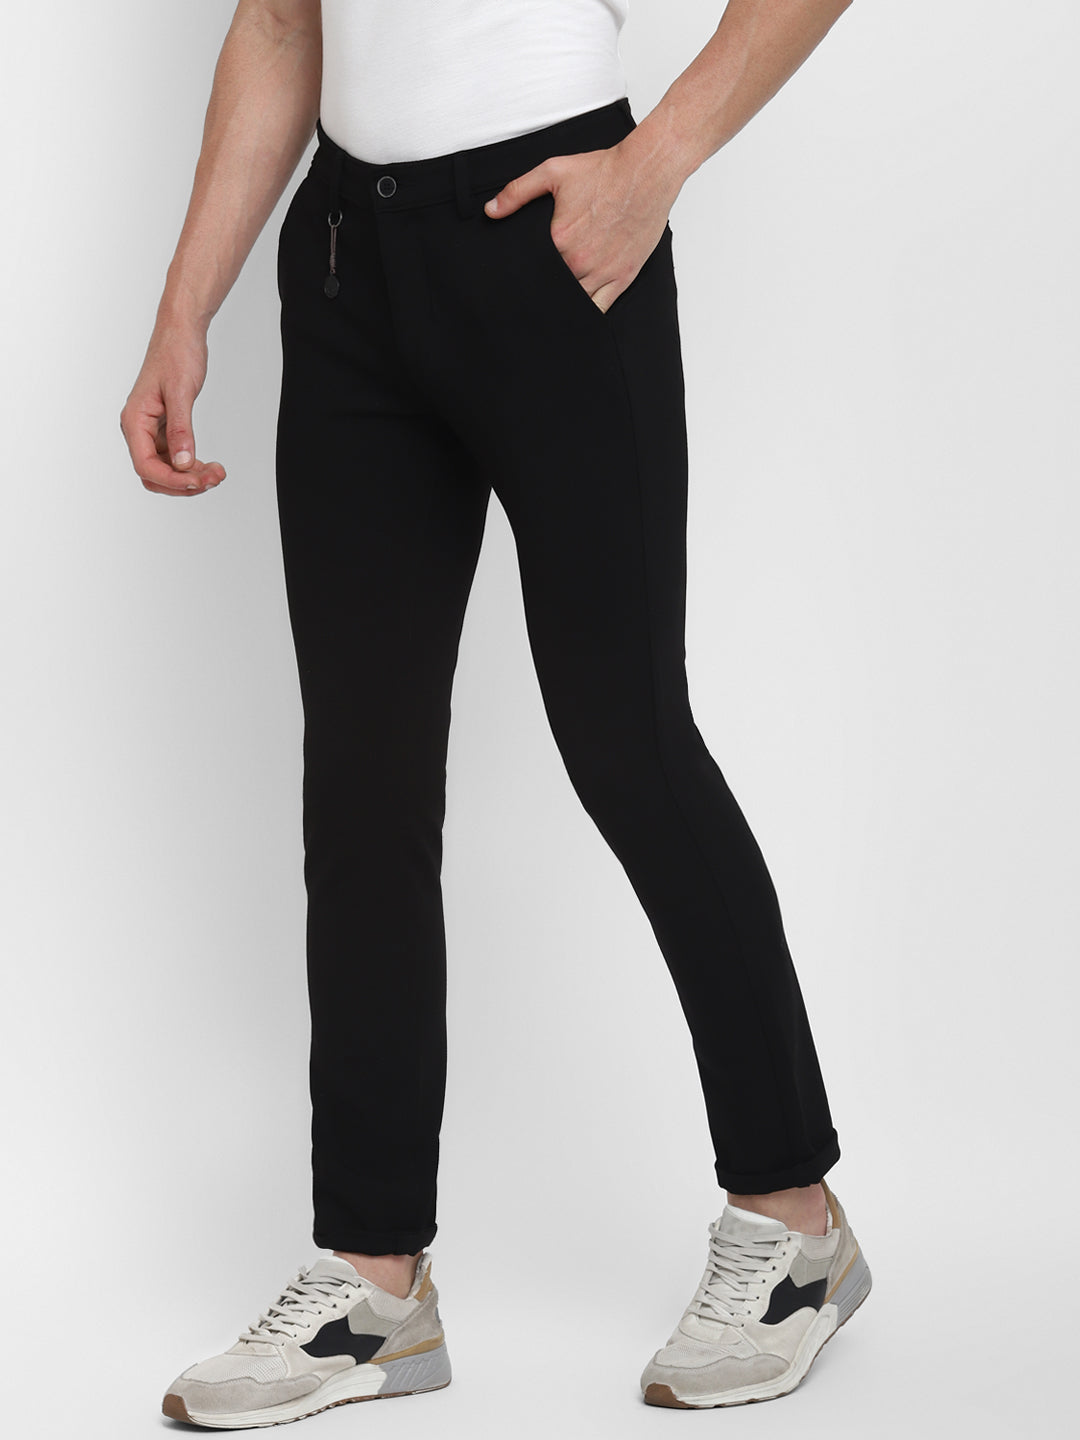 Black Solid Cotton Stretch Narrow Fit Casual Trouser